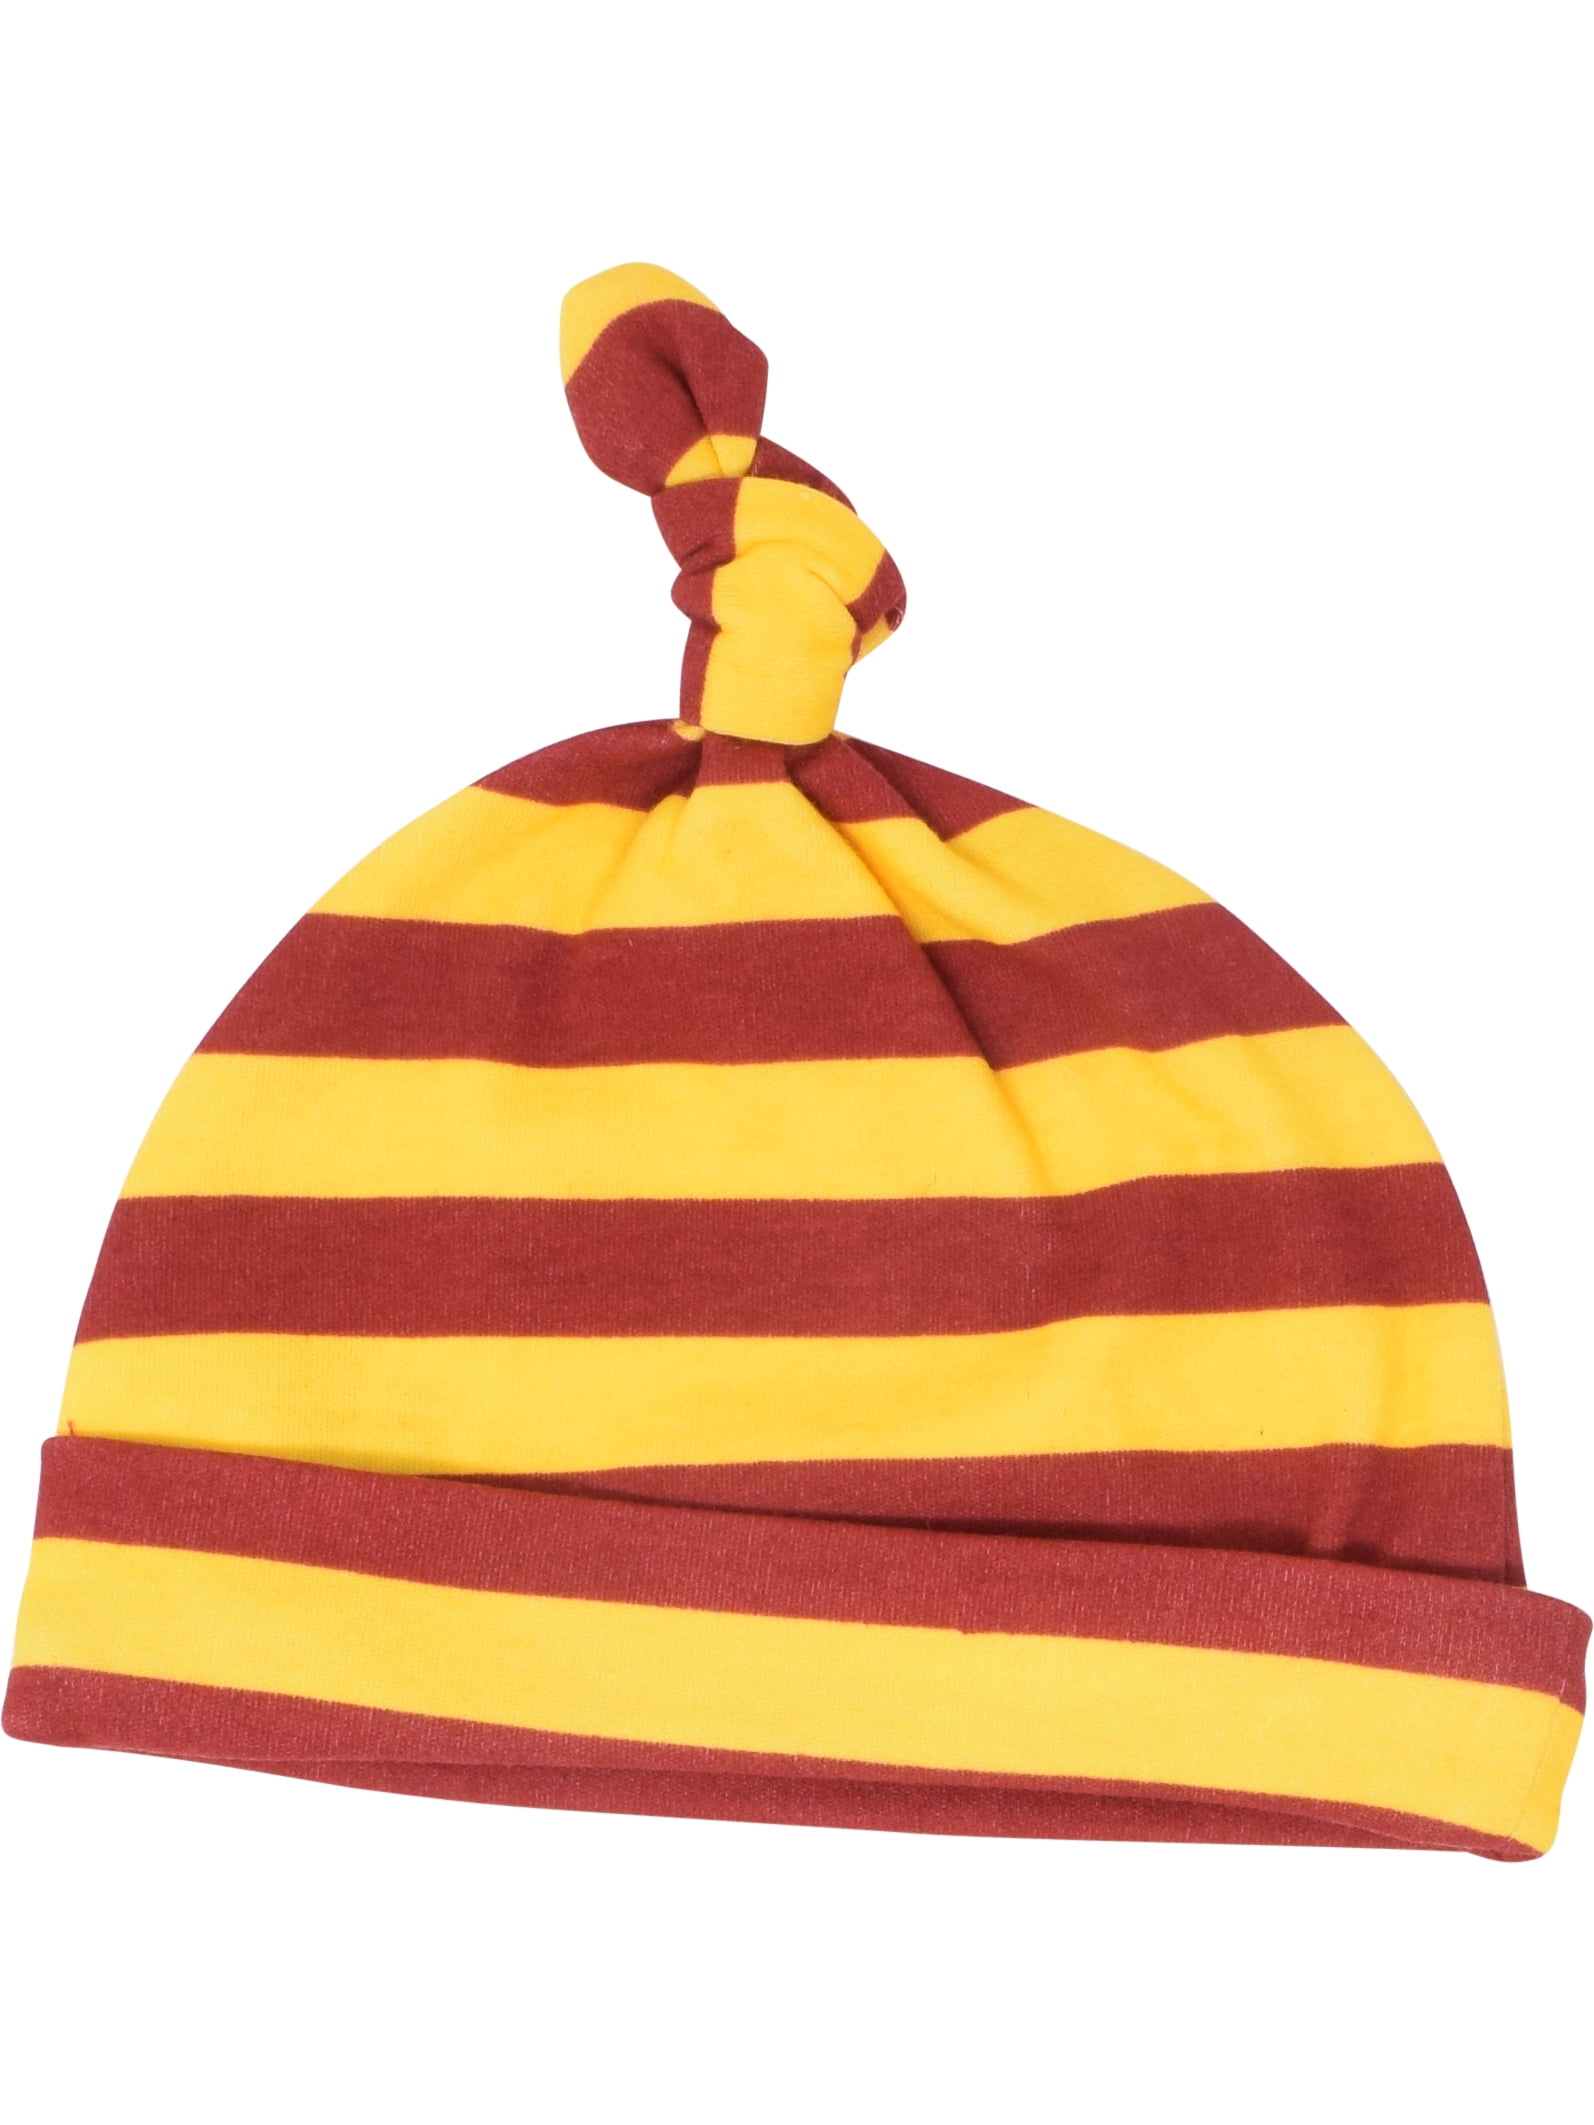 Harry Potter Baby Boys Layette Clothing Set Bodysuit Pants with Footies /& Hat